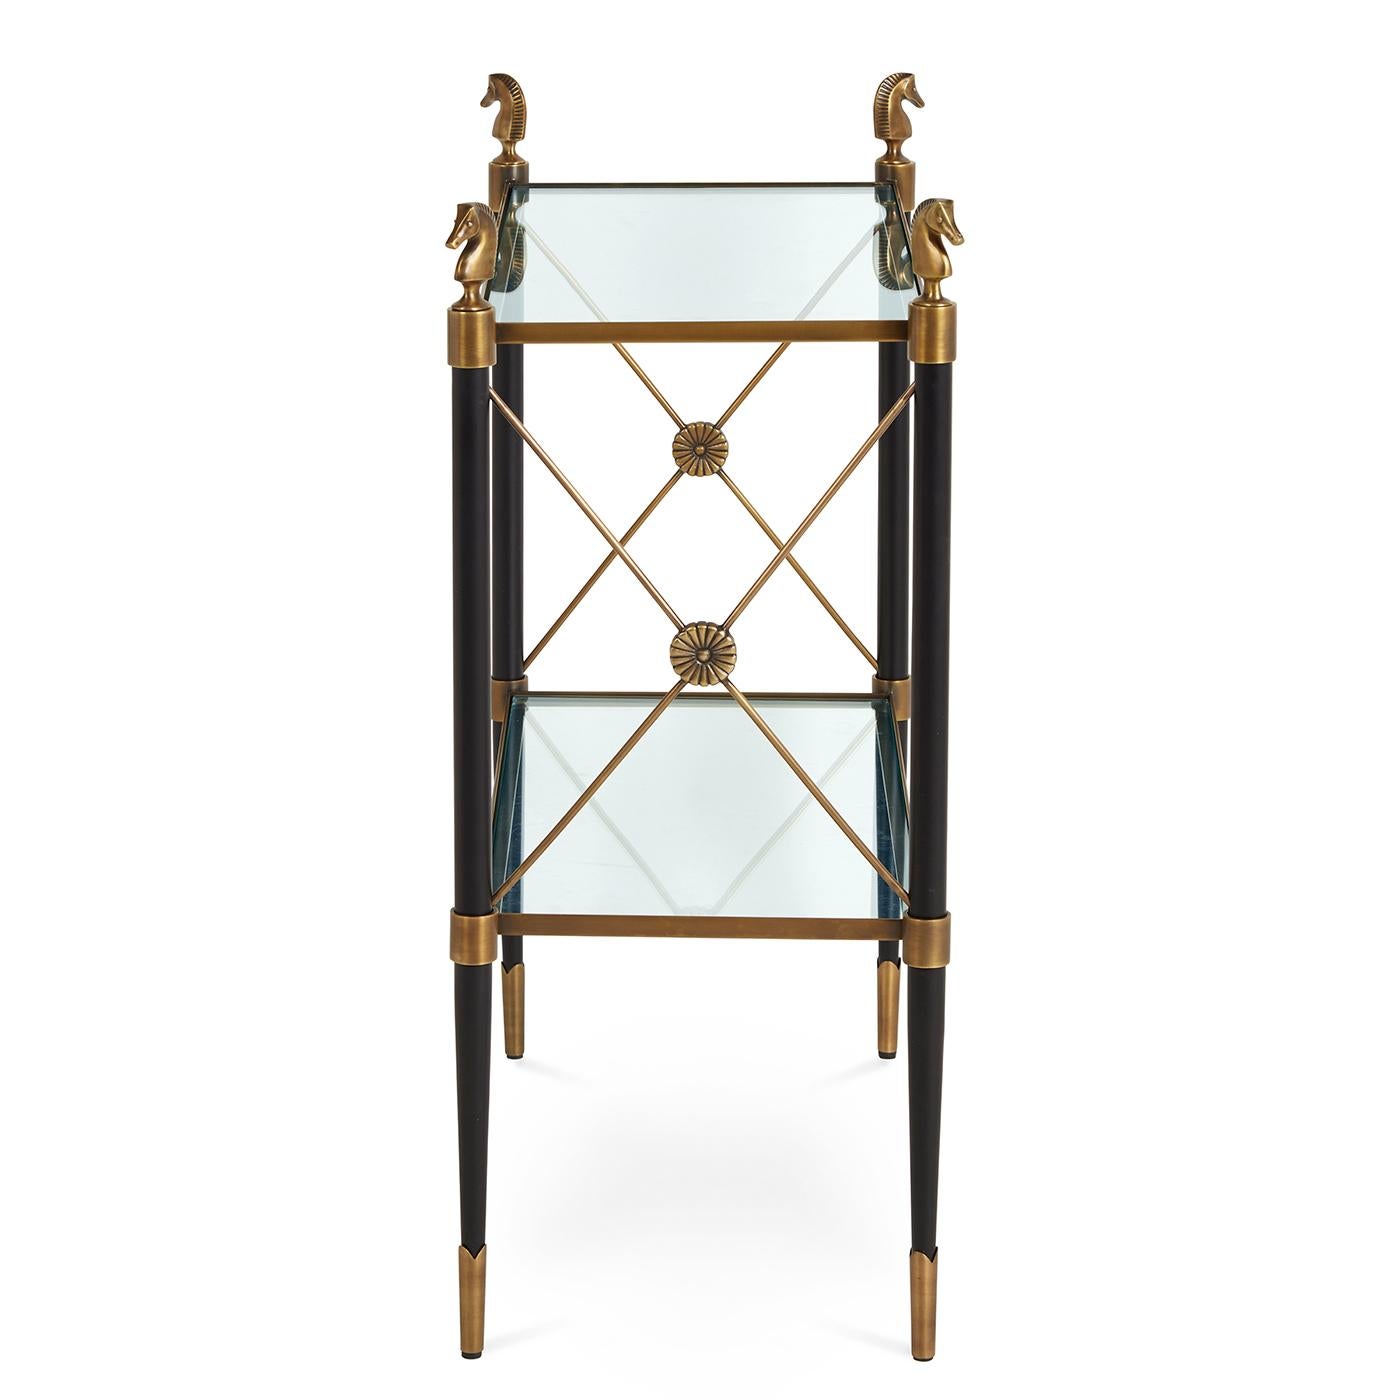 Parisian Flair. A fab storage solution for an entryway or a bathroom, our Rider two-tier side table is an updated take on French Empire style. Blackened brass legs with antiqued brass accents are capped with cast brass horse finials to create a